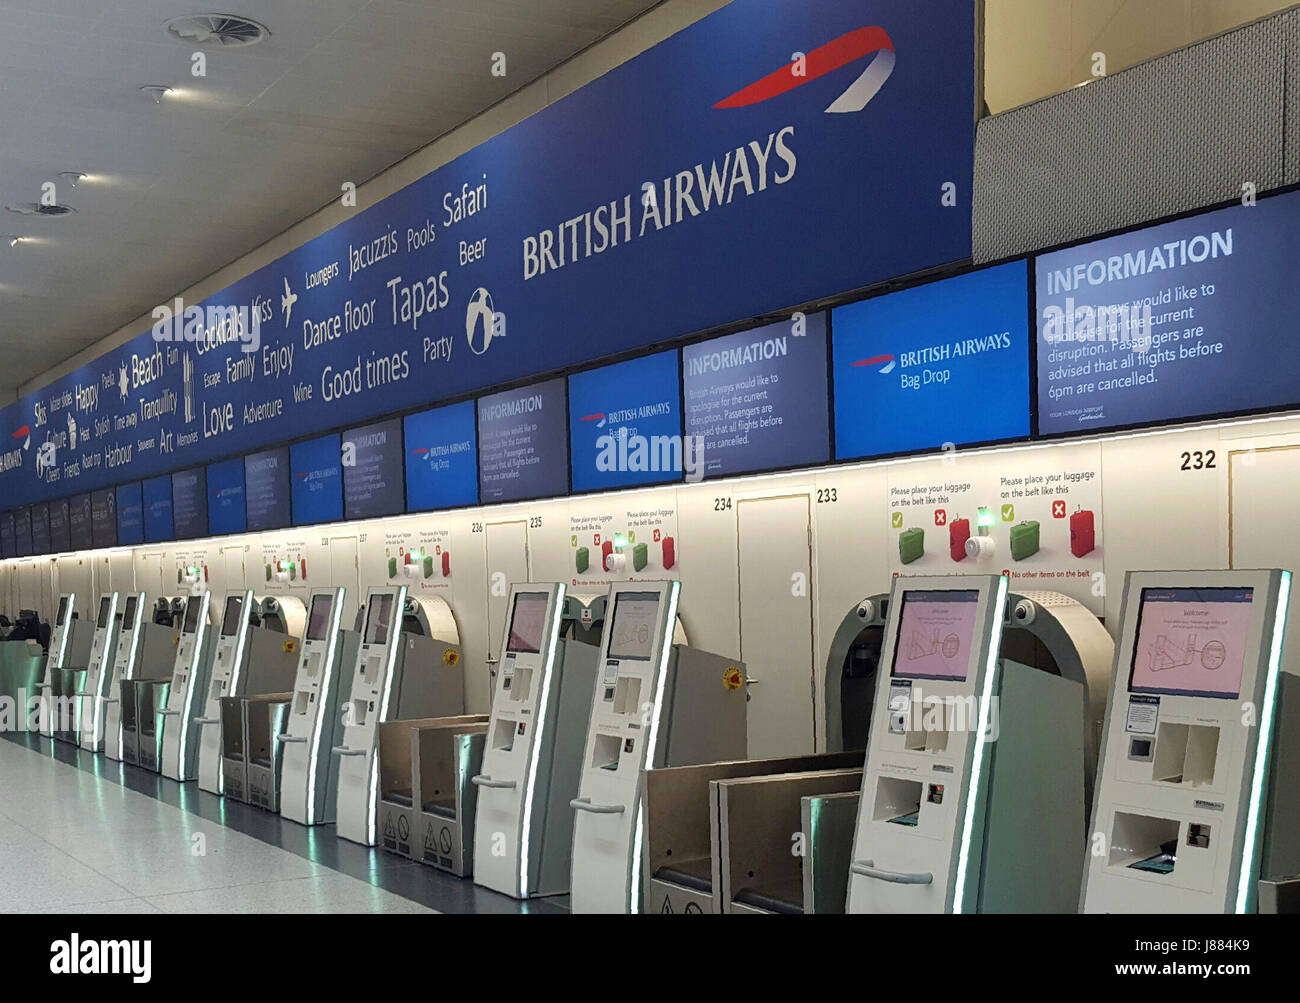 The empty British Airways check-in desk at Gatwick Airport. The airline says it has cancelled all flights leaving from Heathrow and Gatwick for the rest of today because of a 'major IT system failure'. Stock Photo